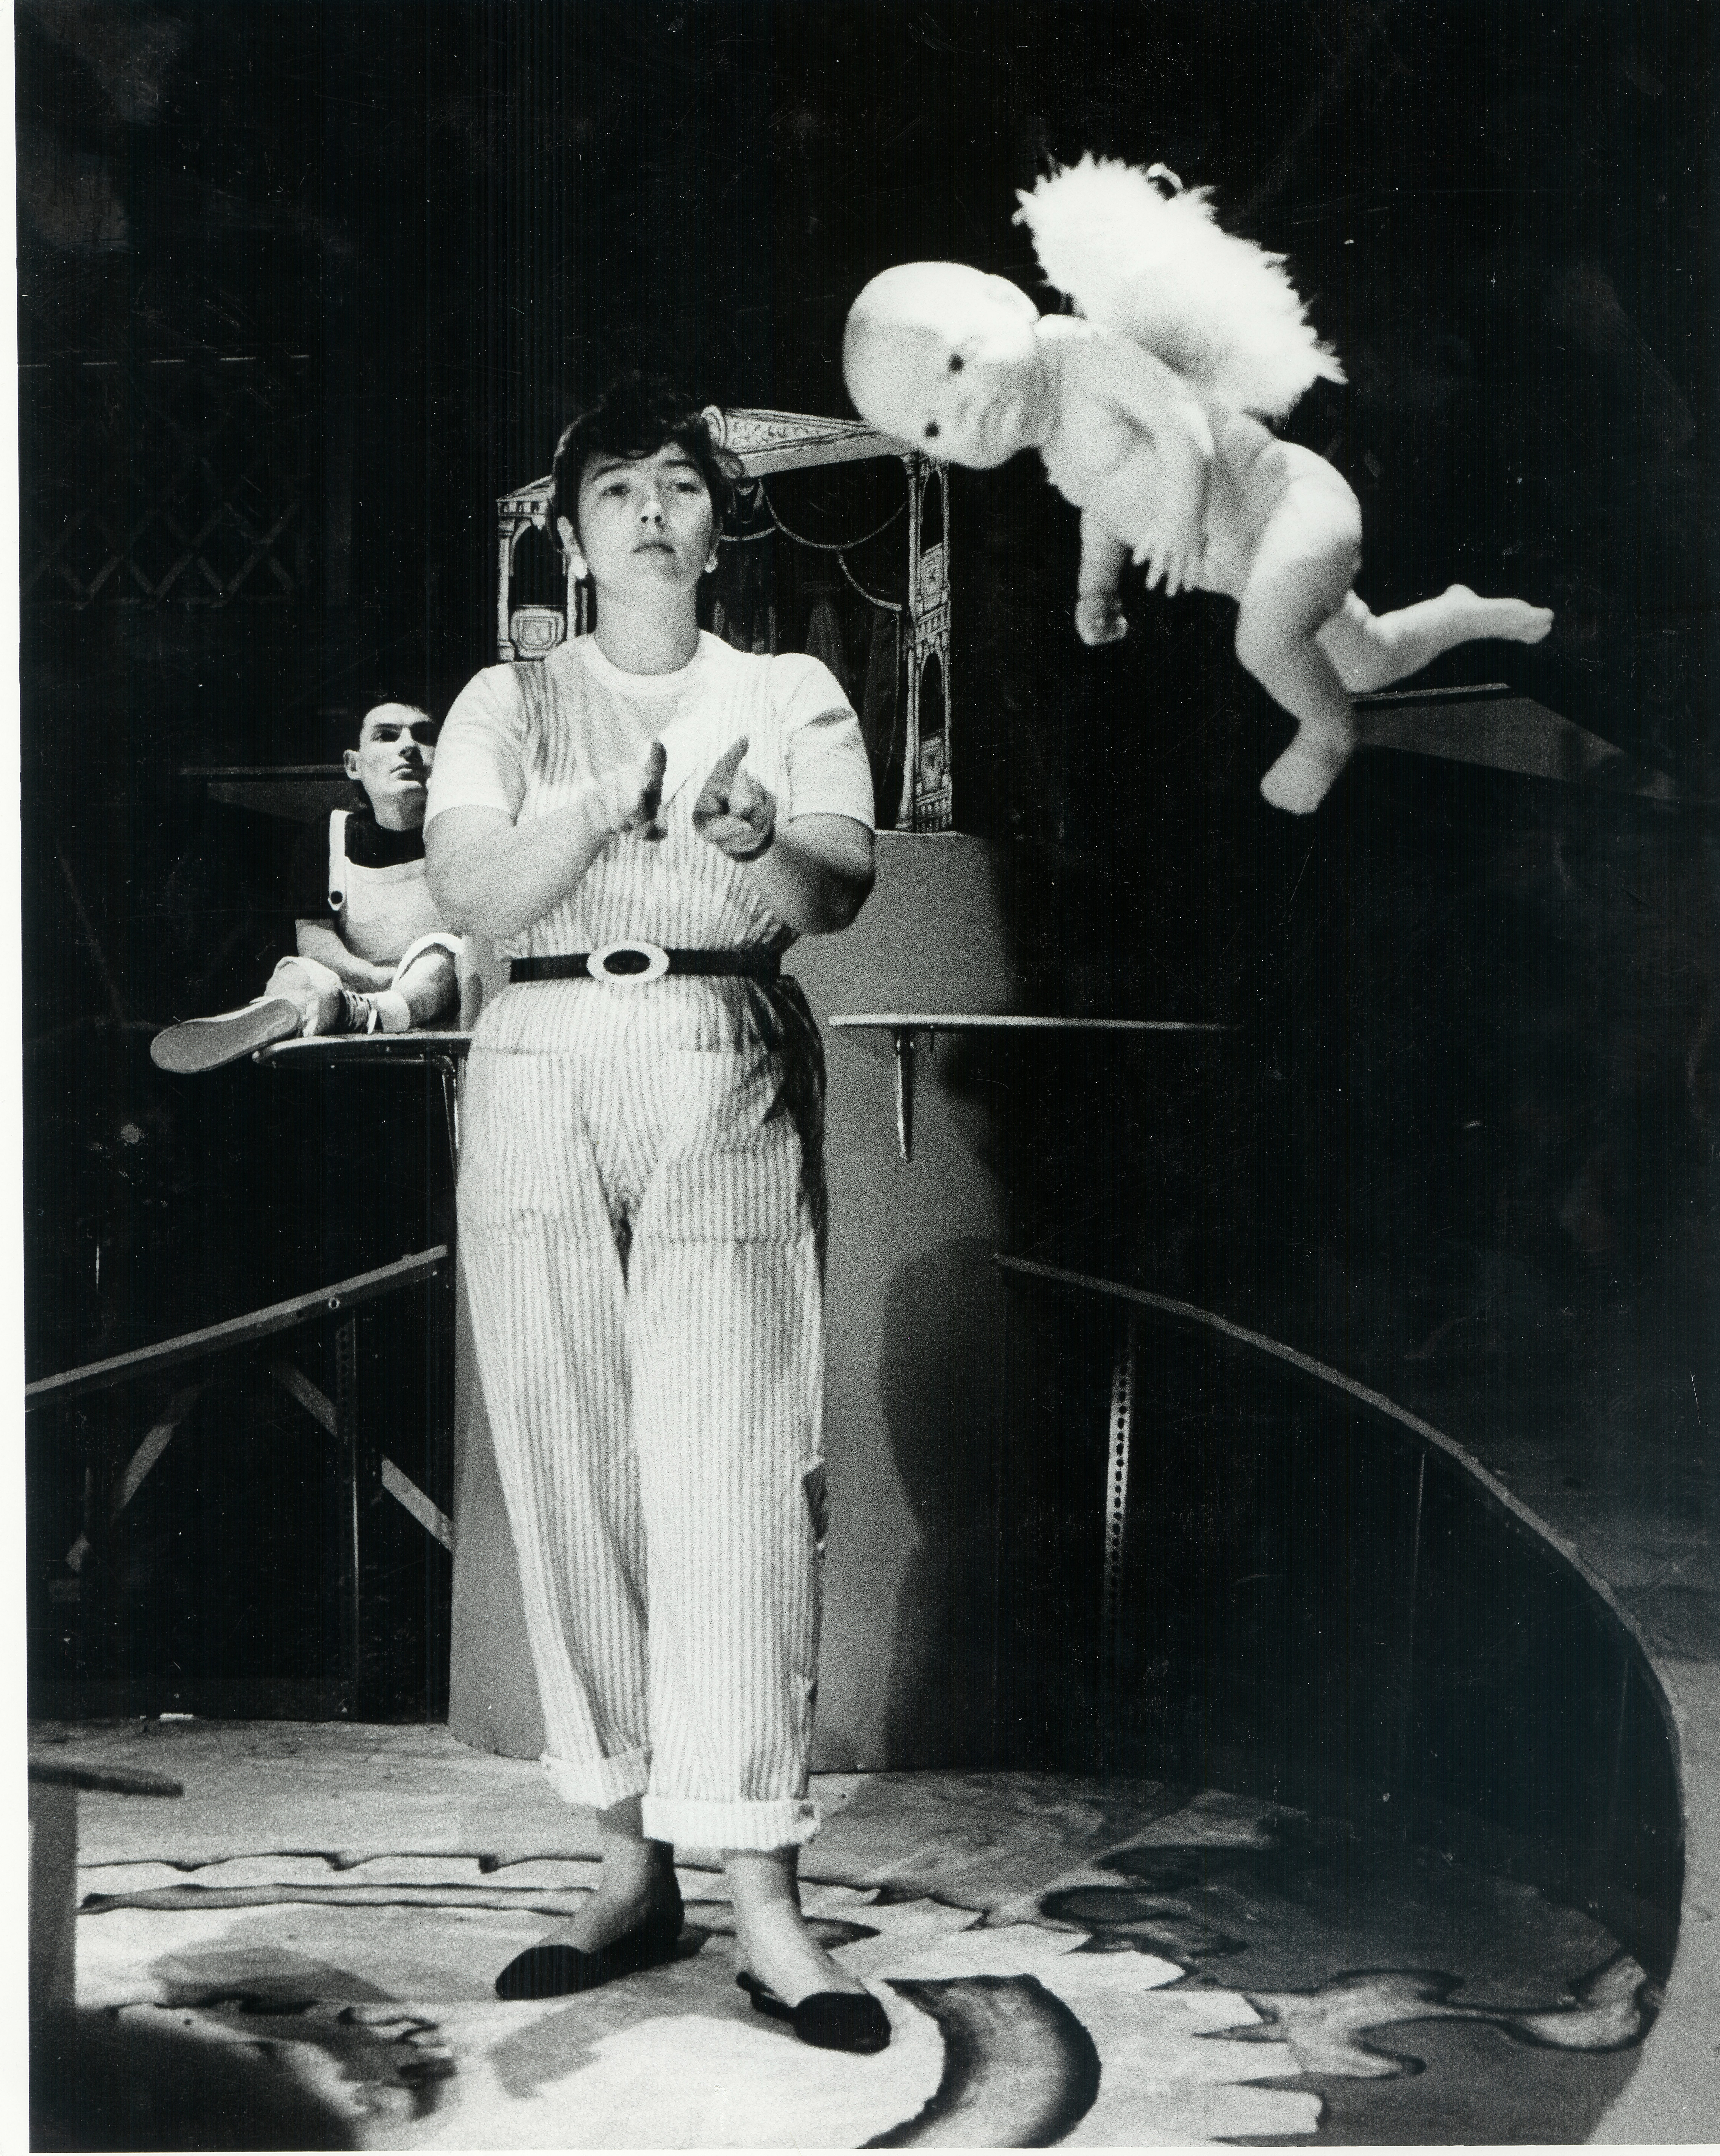 A baby doll is suspended above a stage, it had angel wings glued to it. A performer stands and points at it.